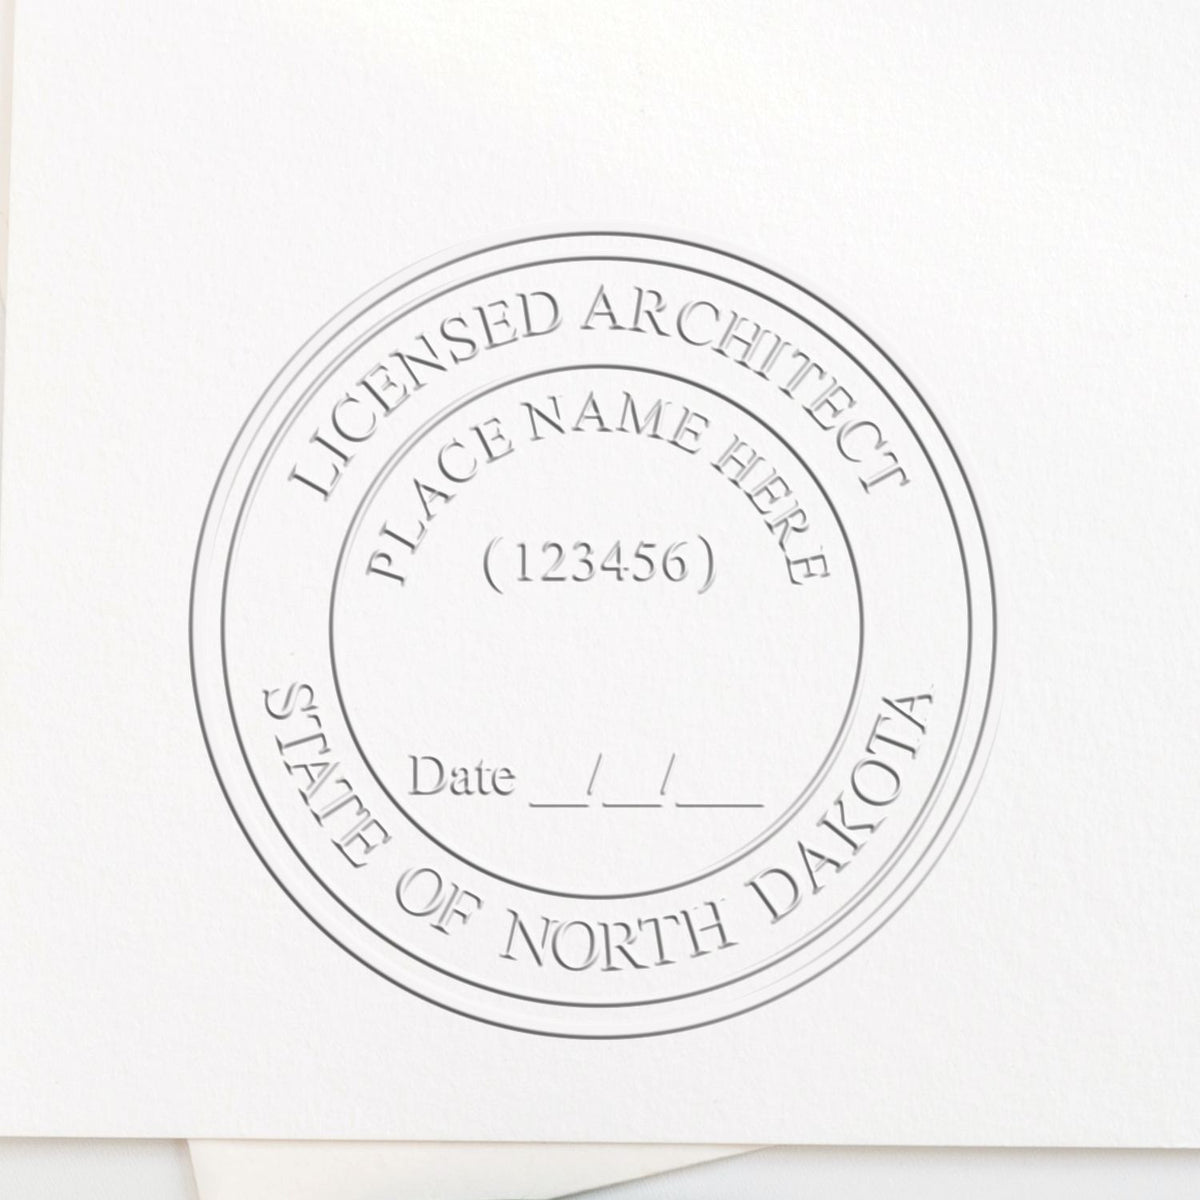 A stamped impression of the North Dakota Desk Architect Embossing Seal in this stylish lifestyle photo, setting the tone for a unique and personalized product.